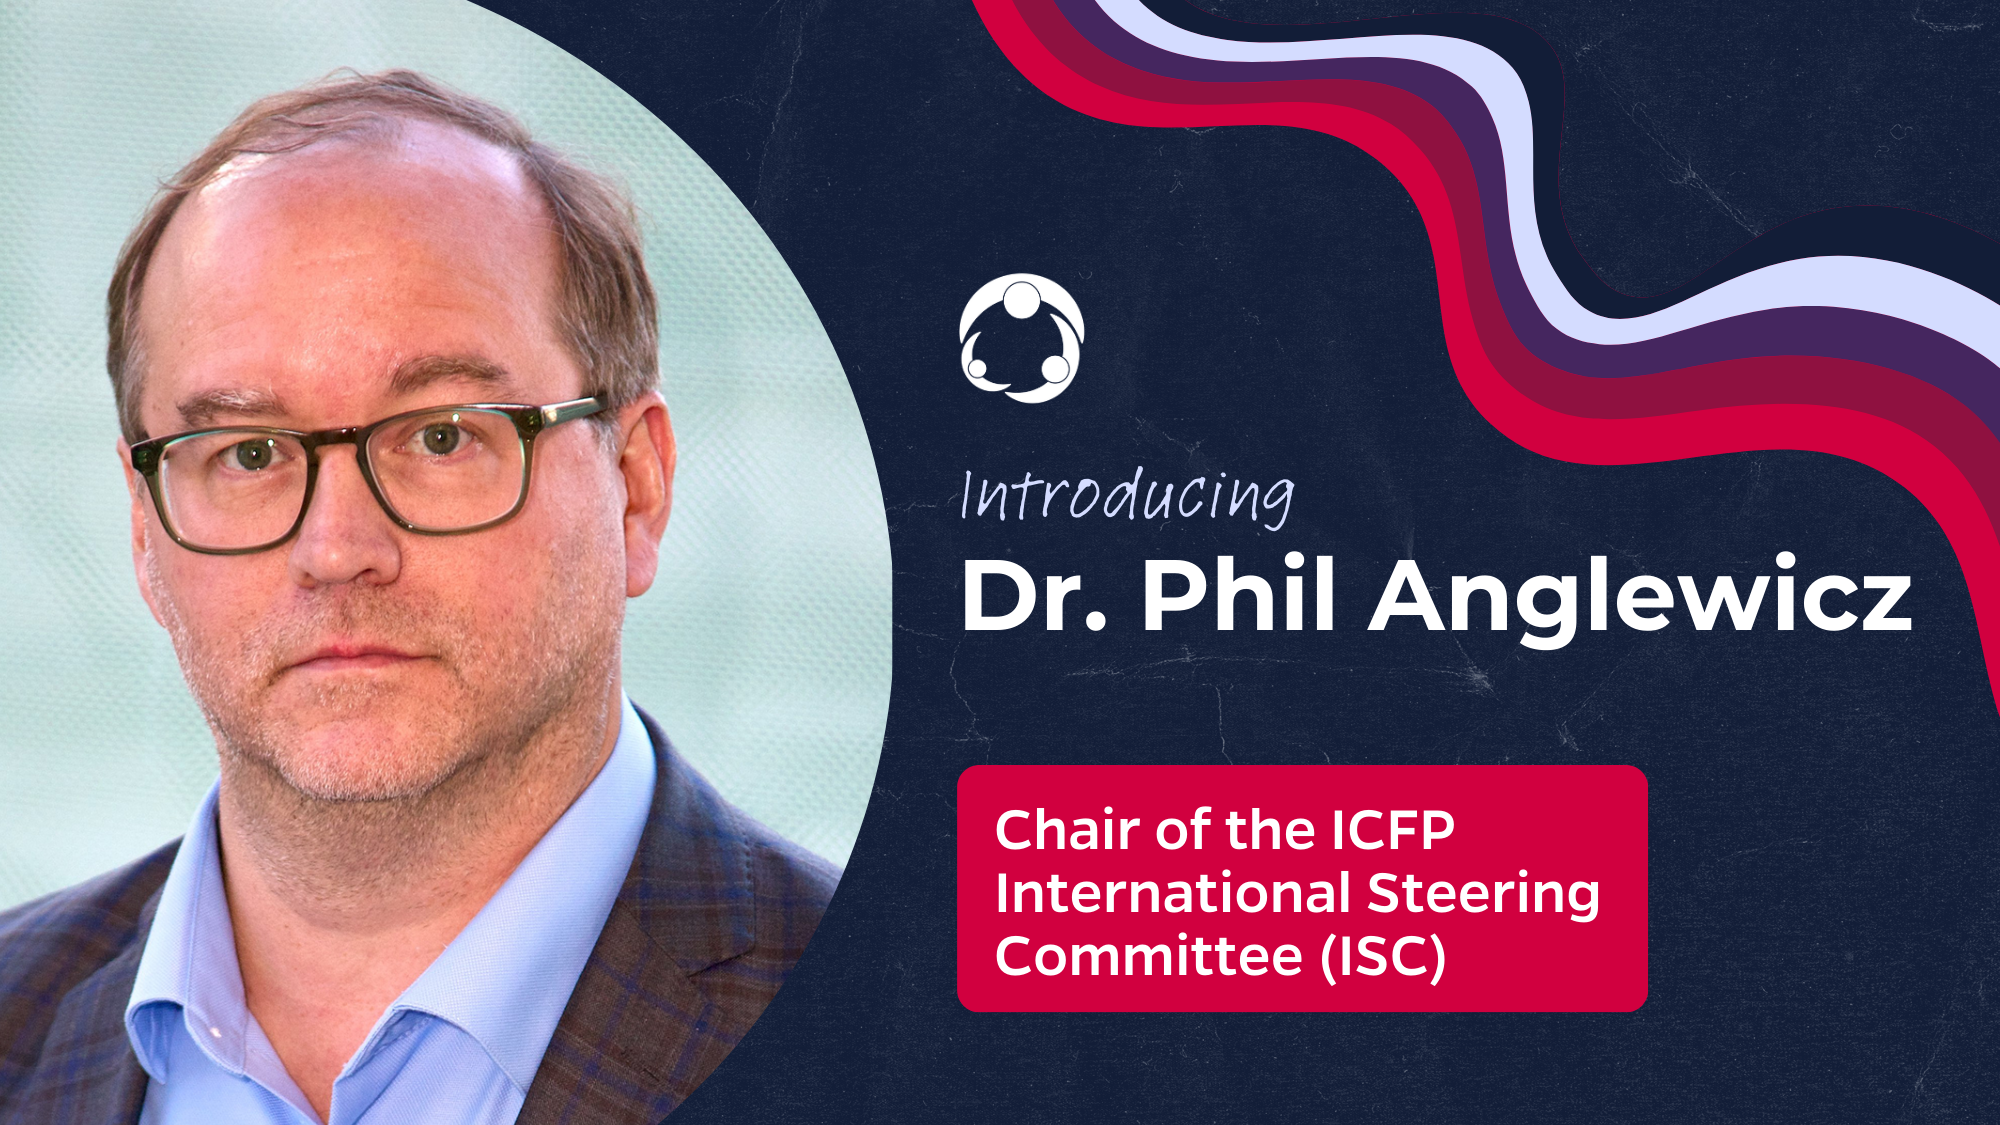 Welcoming the New Chair of the ICFP International Steering Committee, Dr. Philip Anglewicz